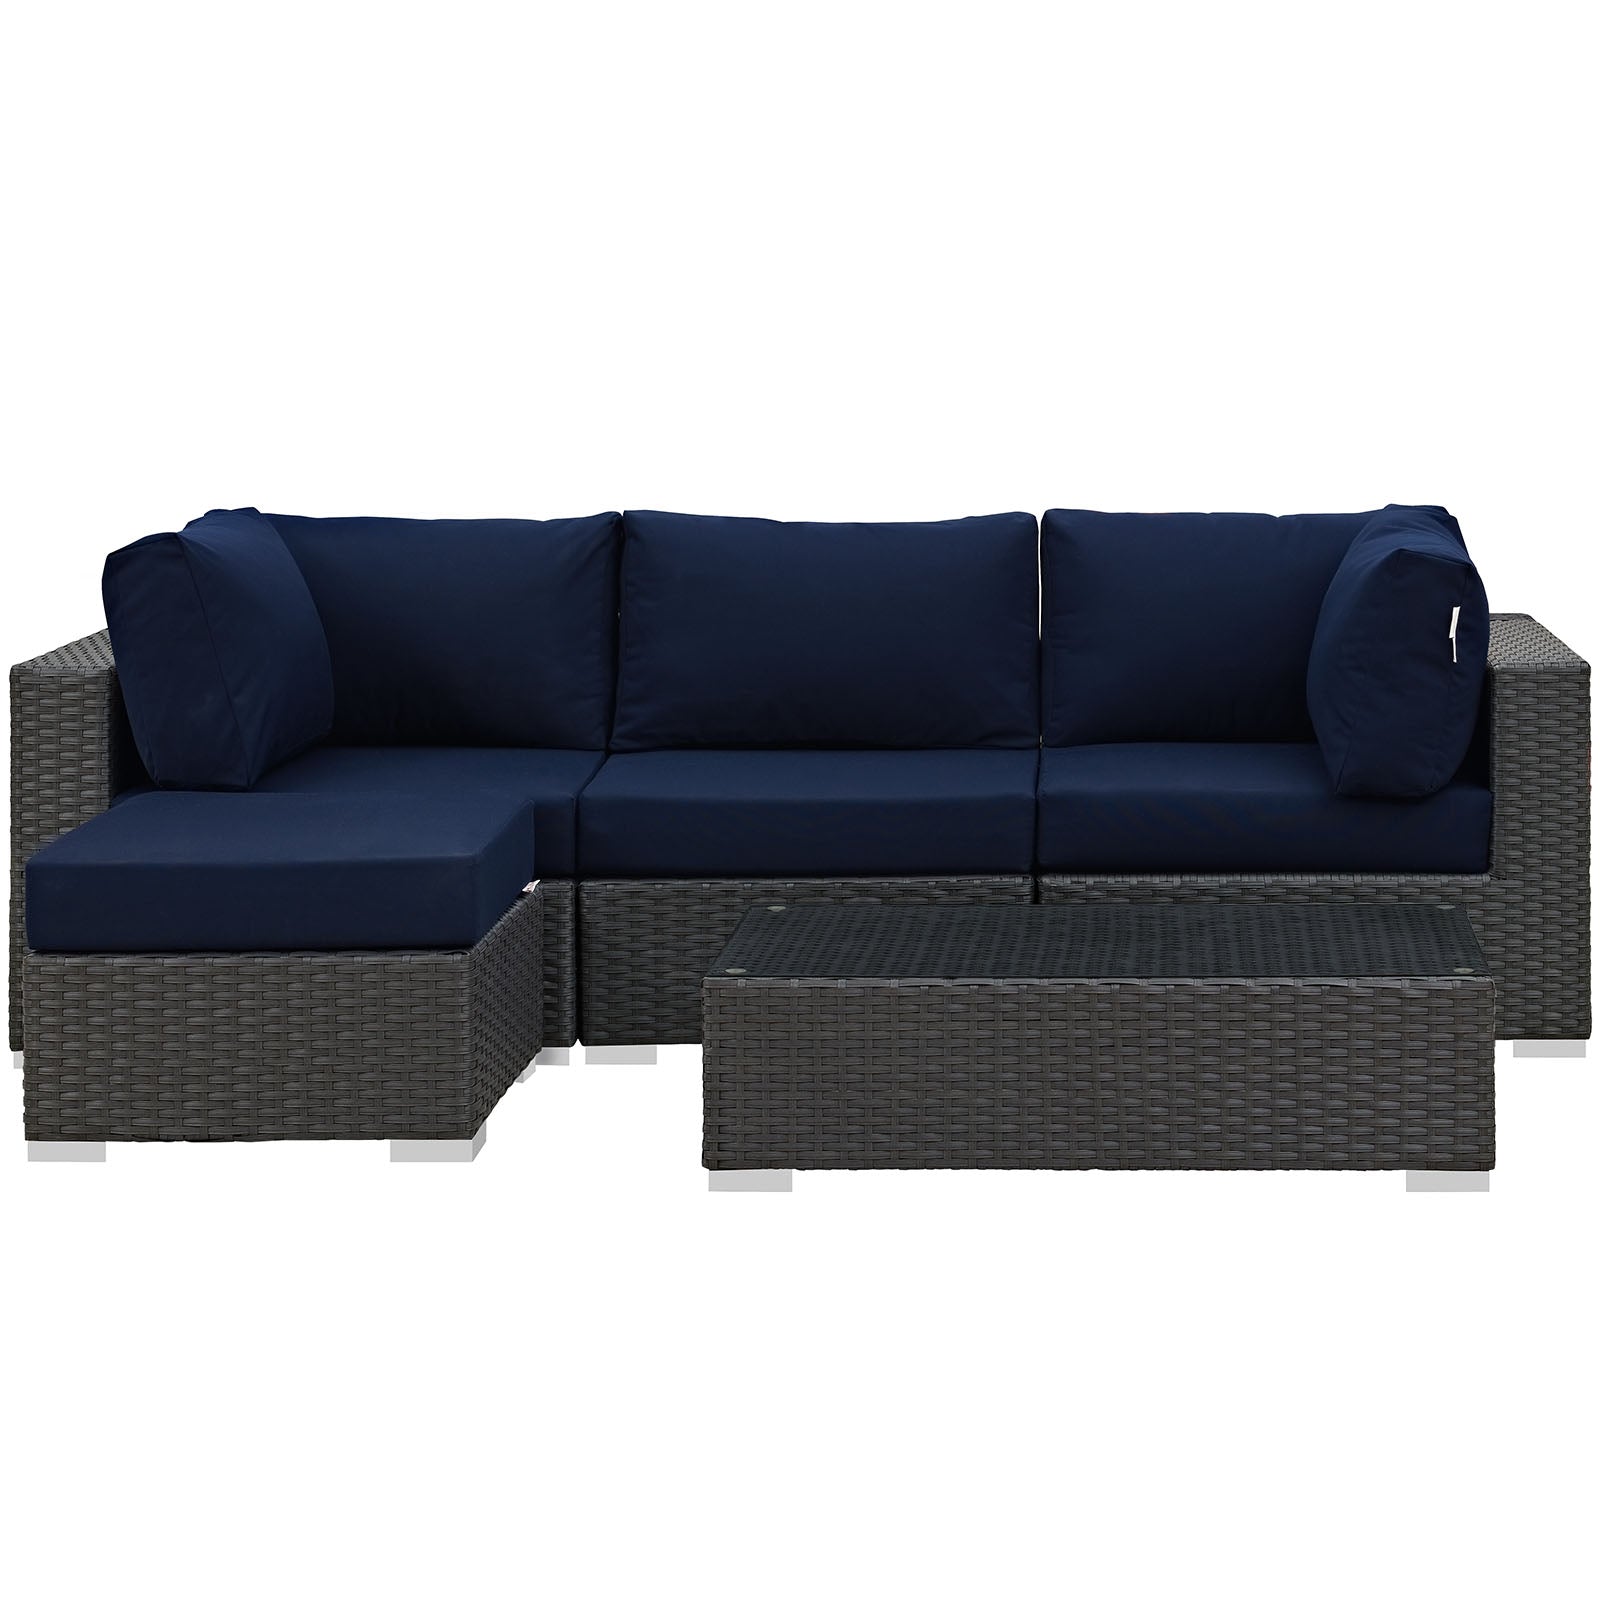 Sojourn 5 Piece Outdoor Patio Sectional Set Navy